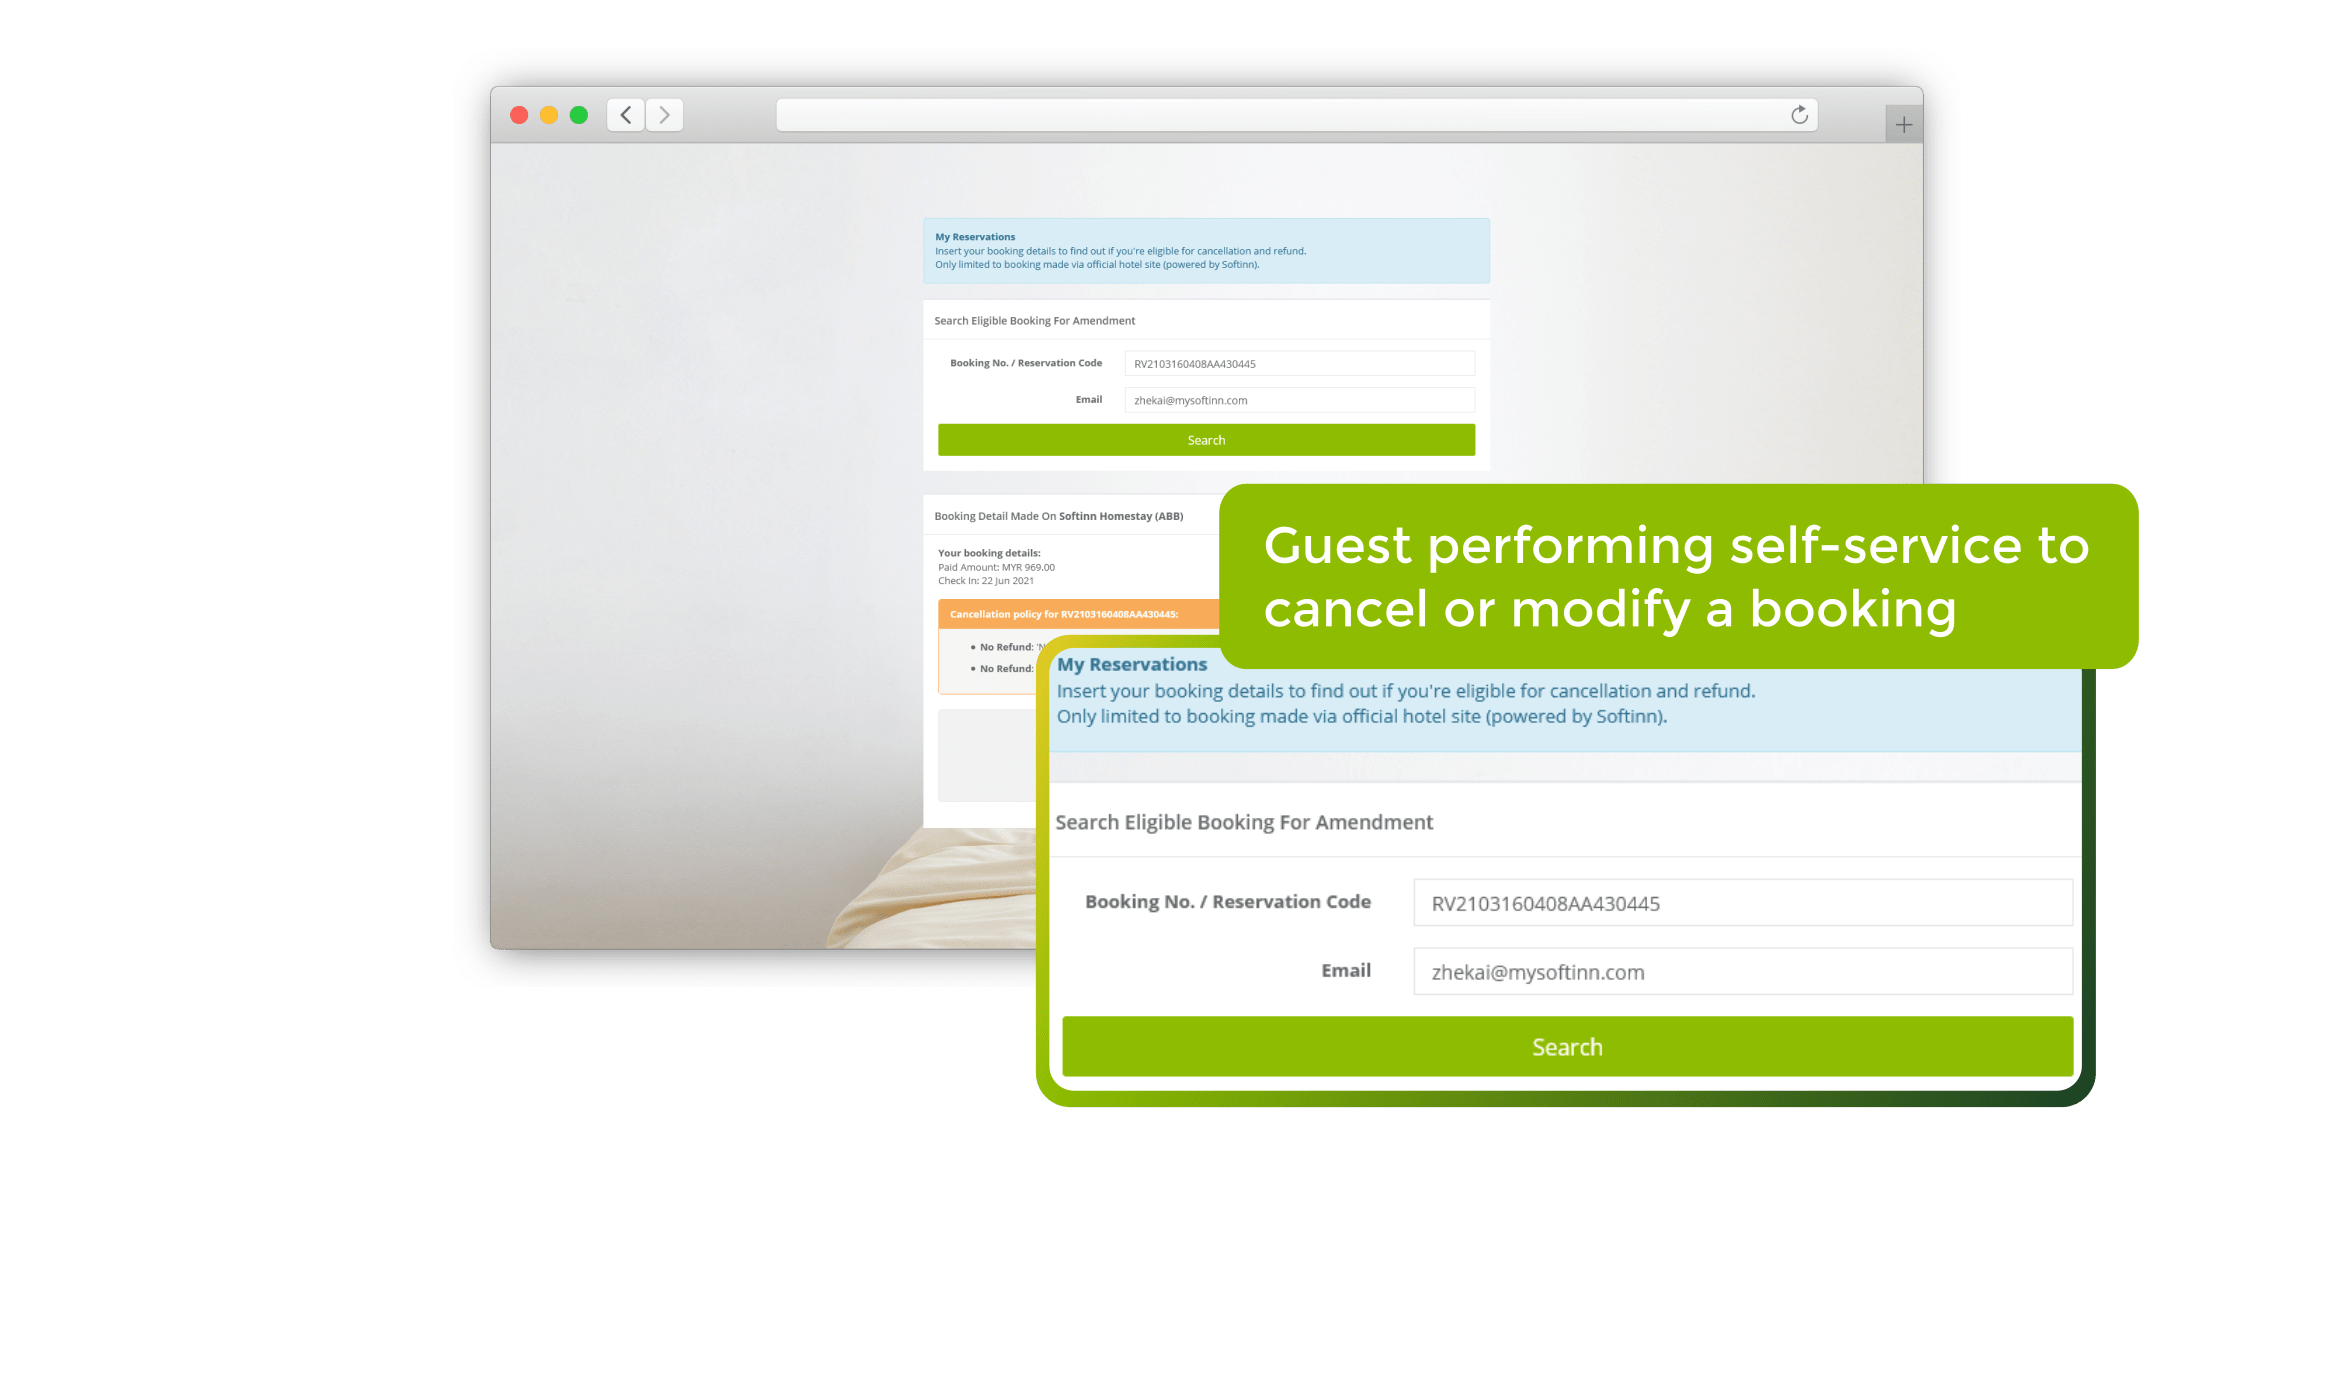 Guest performing self-service to cancel or modify a booking